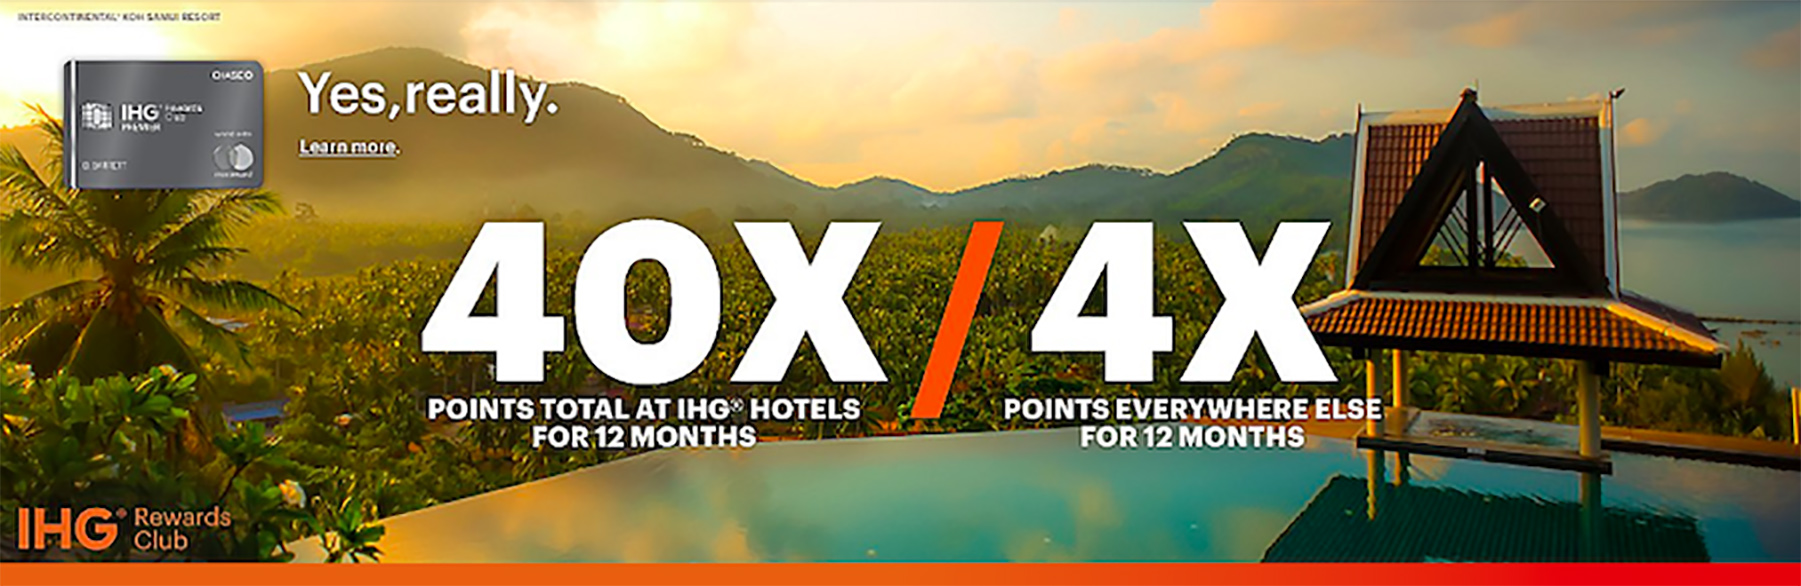 IHG Premier Card Best Credit Card Offer 40X 125000 Points • Point Me to the Plane